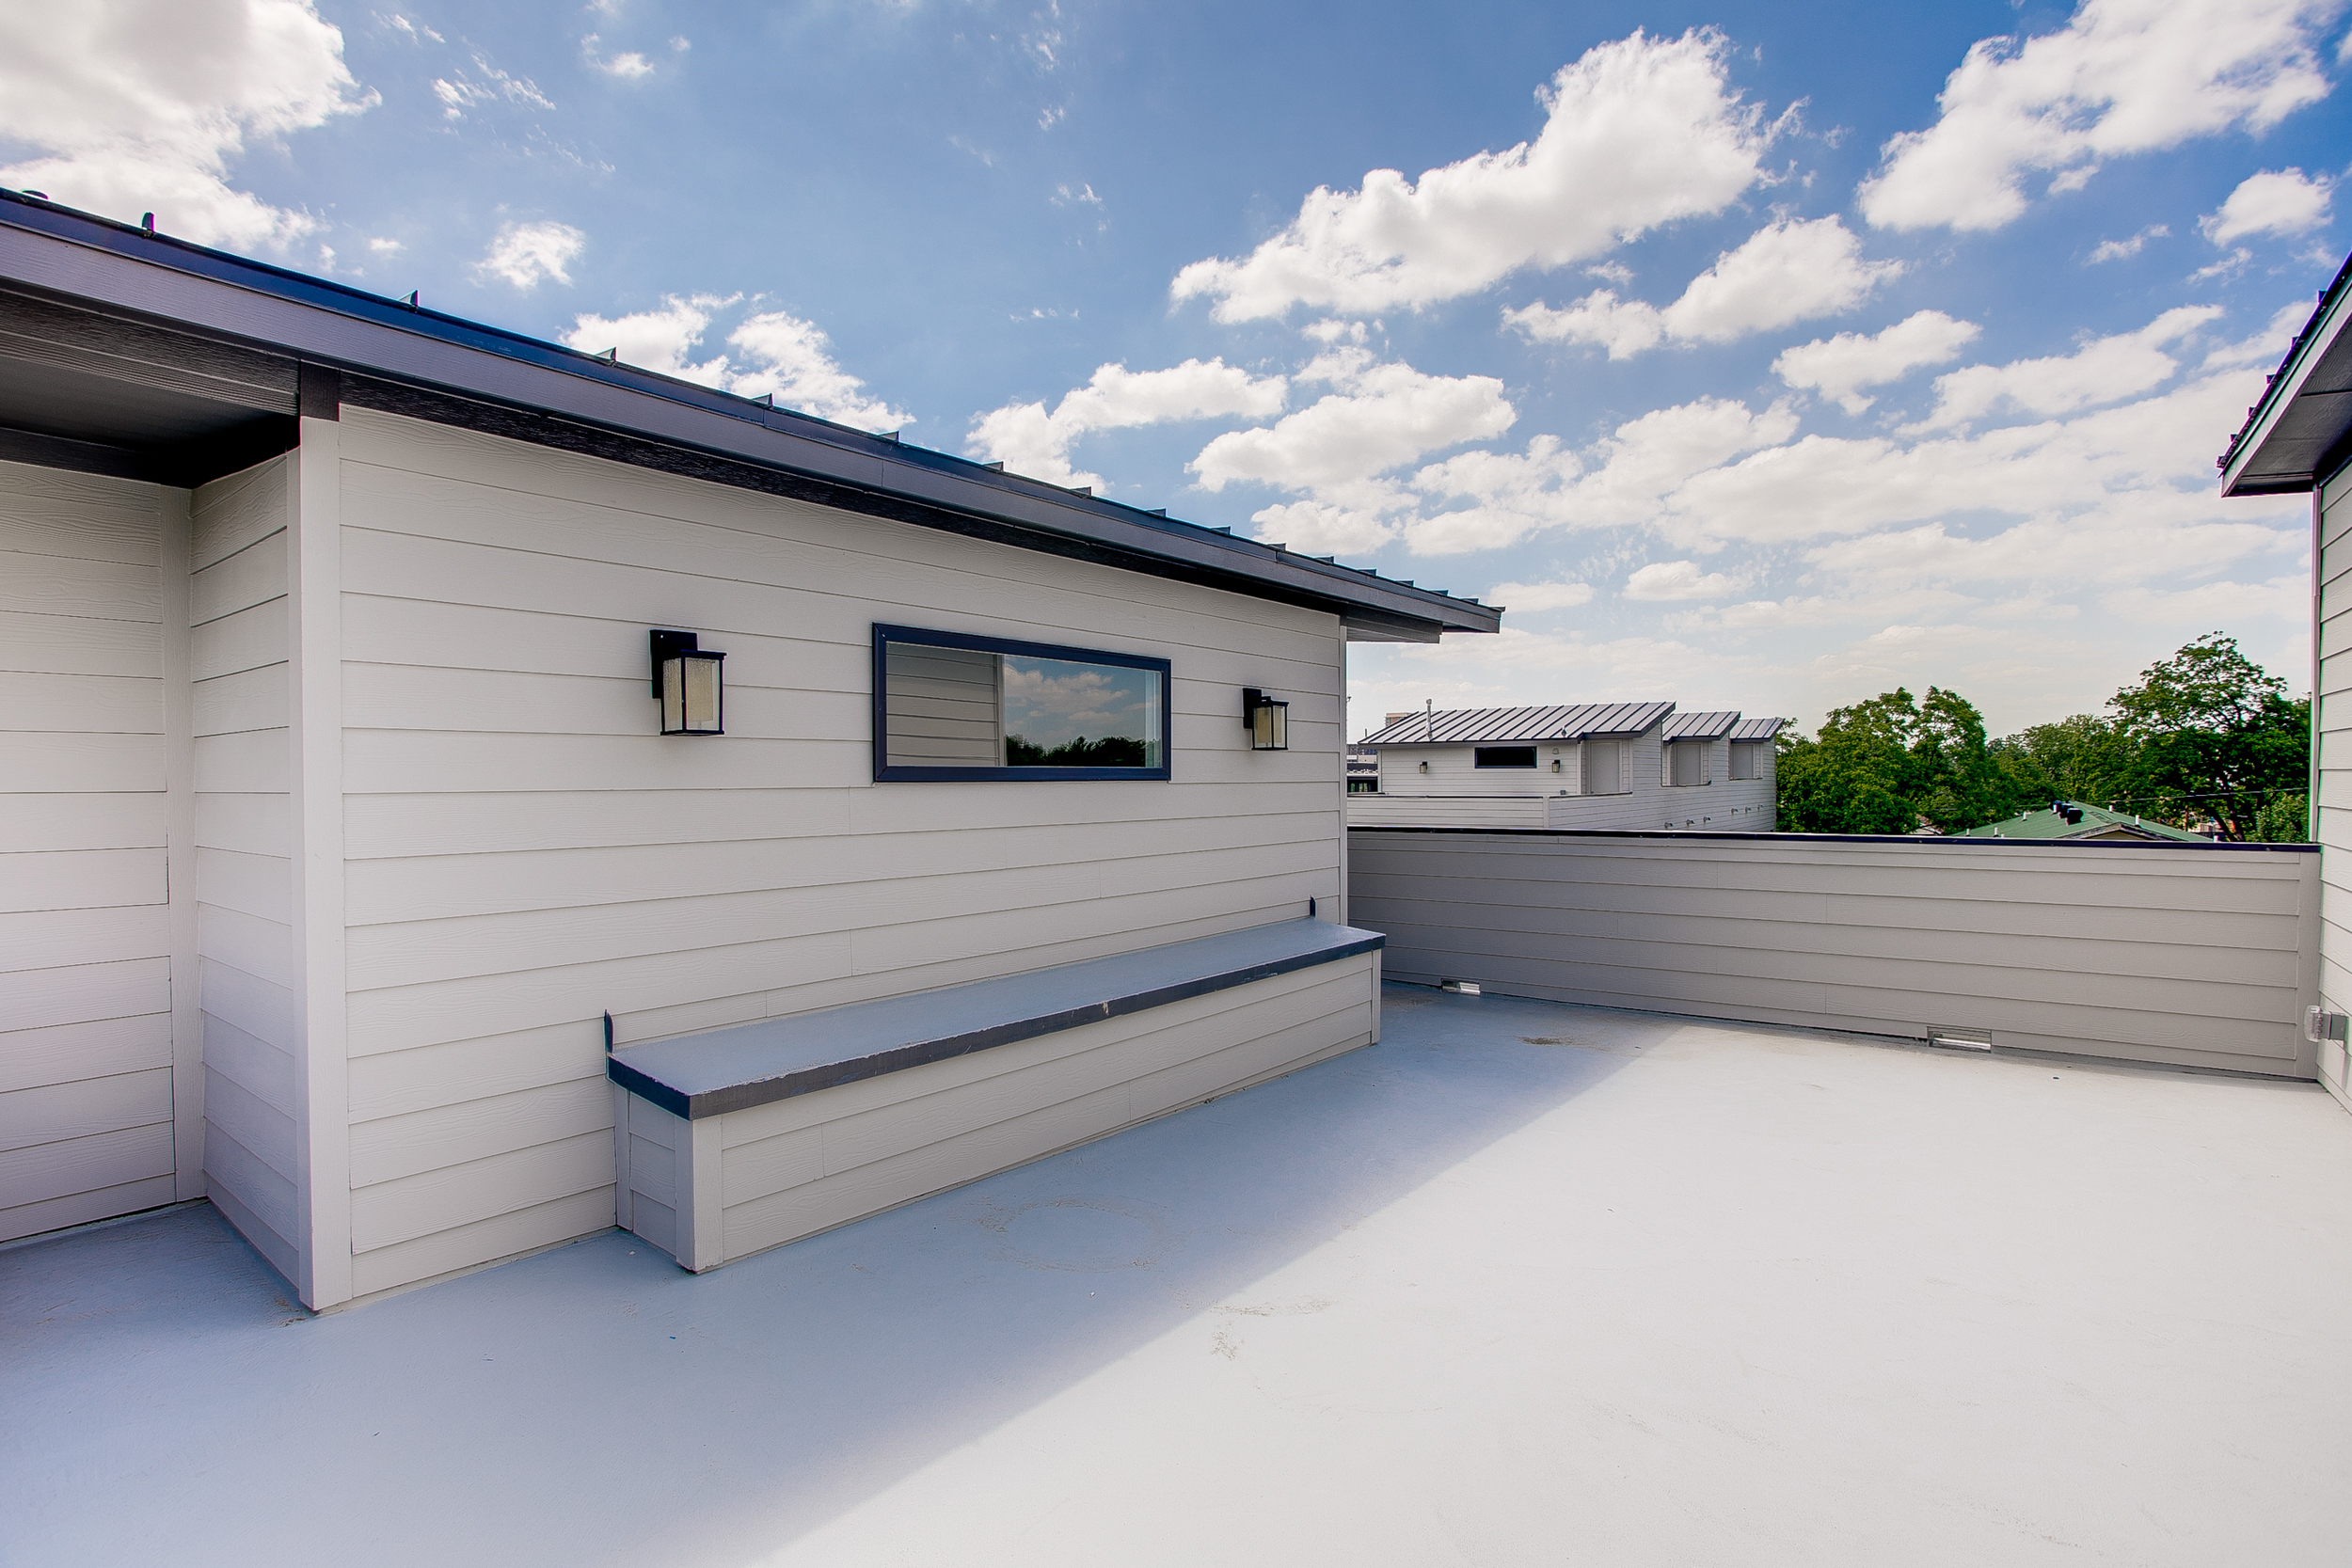 Exterior view of the rooftop deck of the townhome with white siding, a black roof, and views of the surrounding area